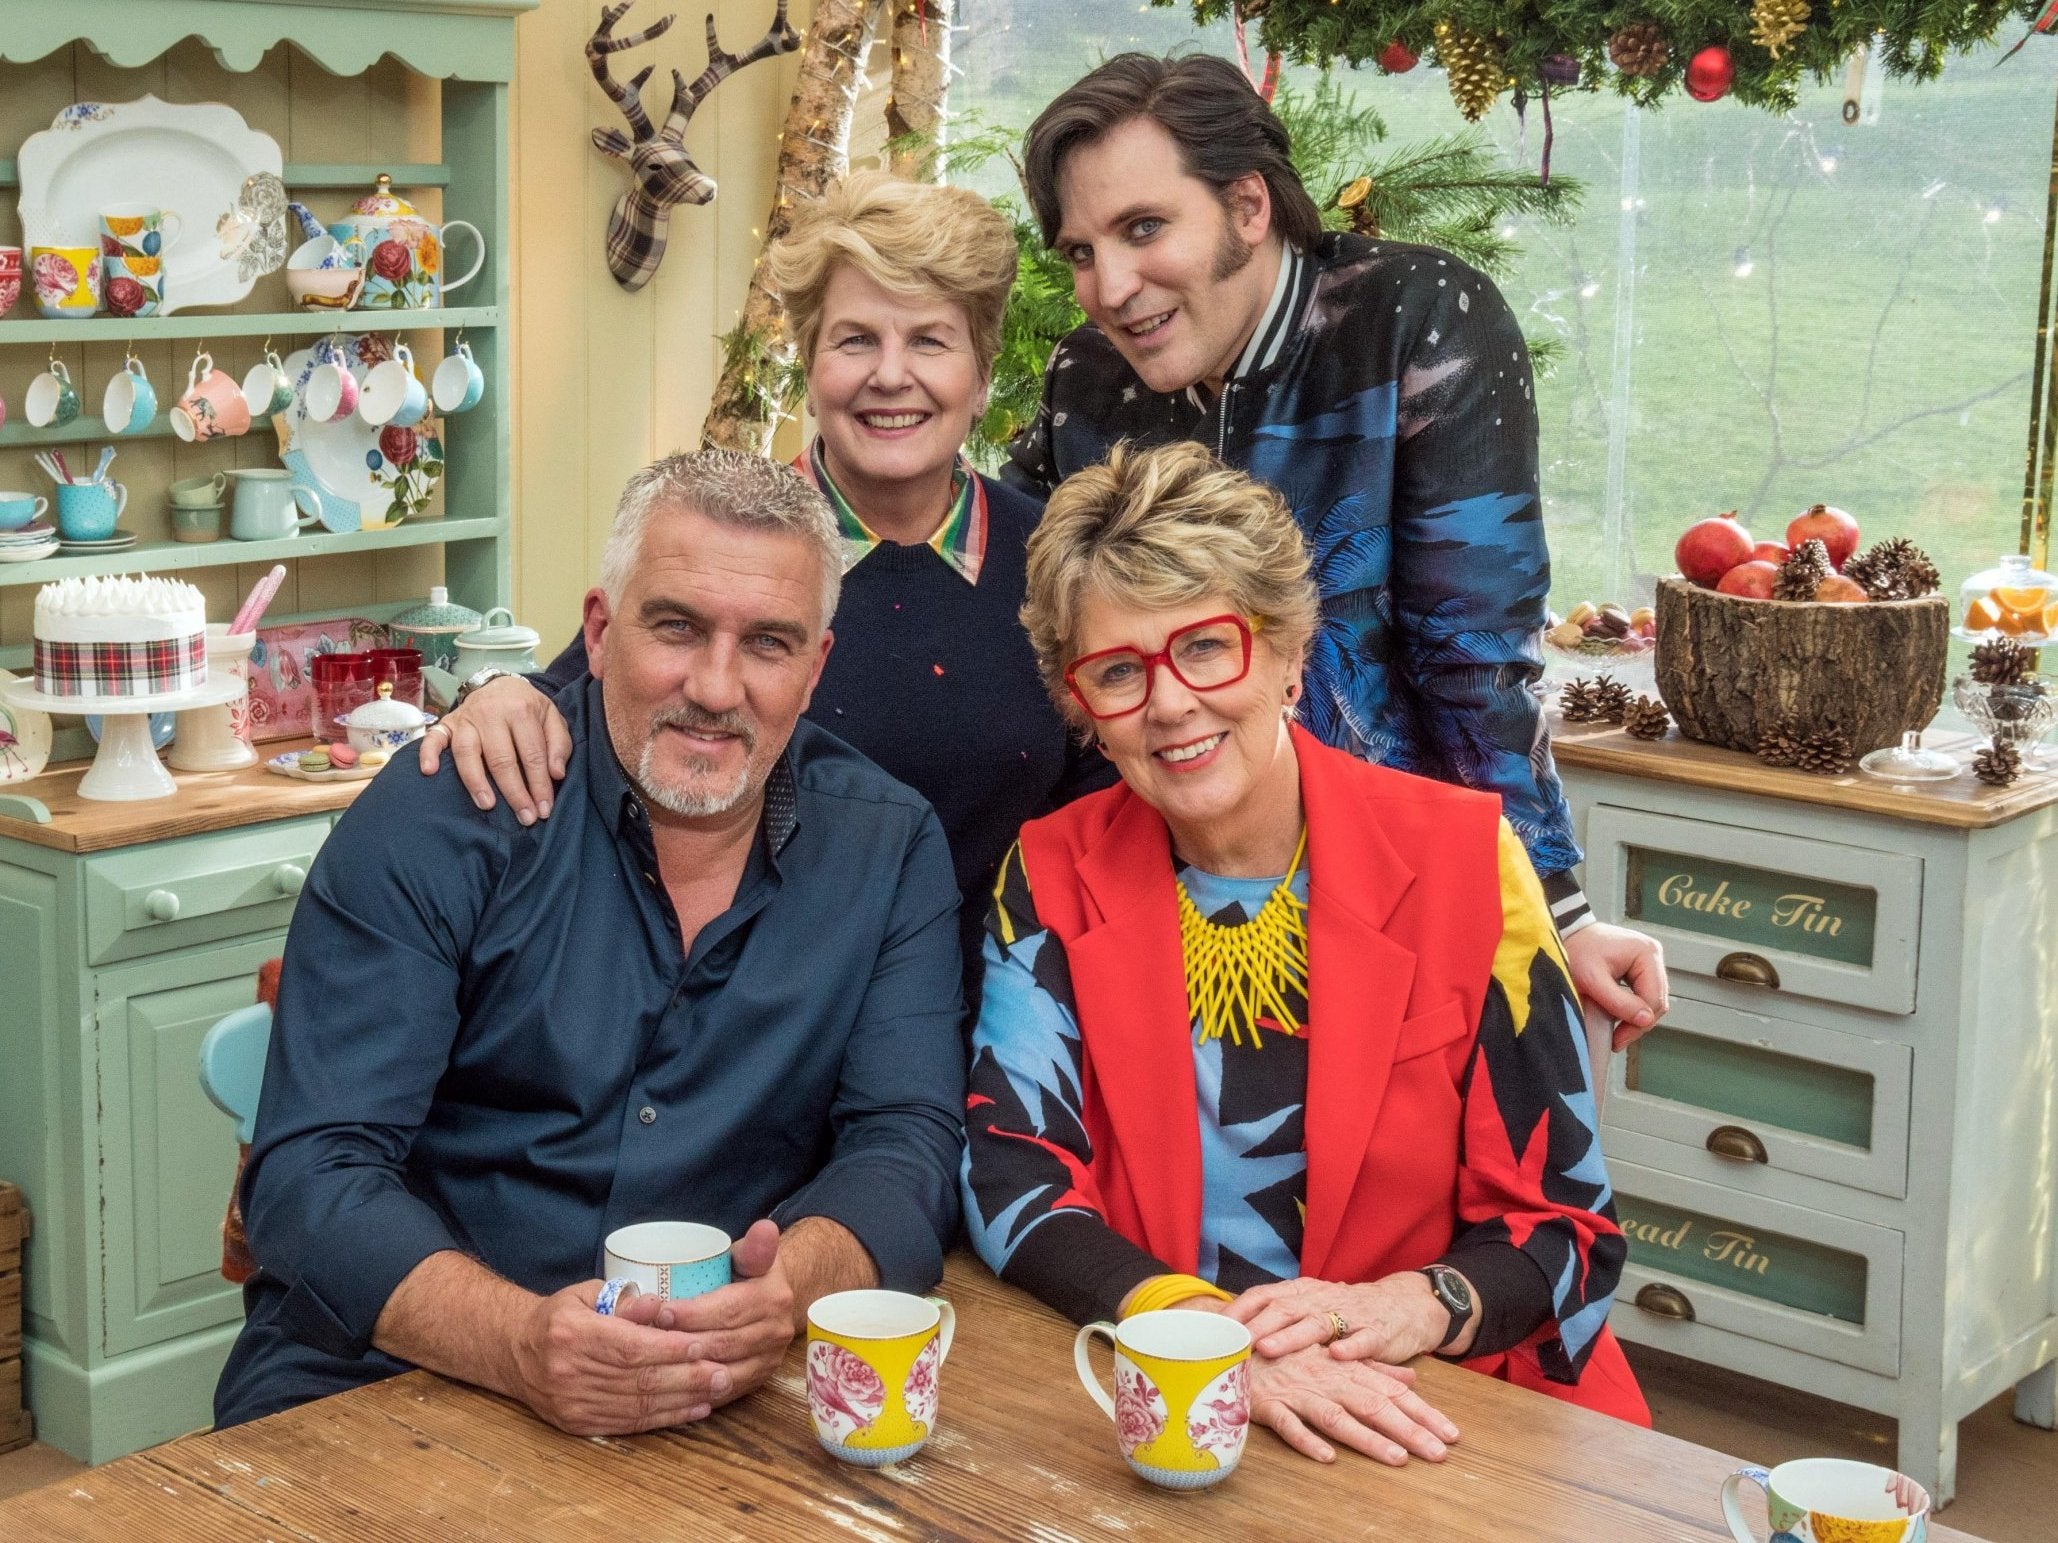 Paul, Sandi, Prue and Noel on ‘The Great New Year’s Bake Off’